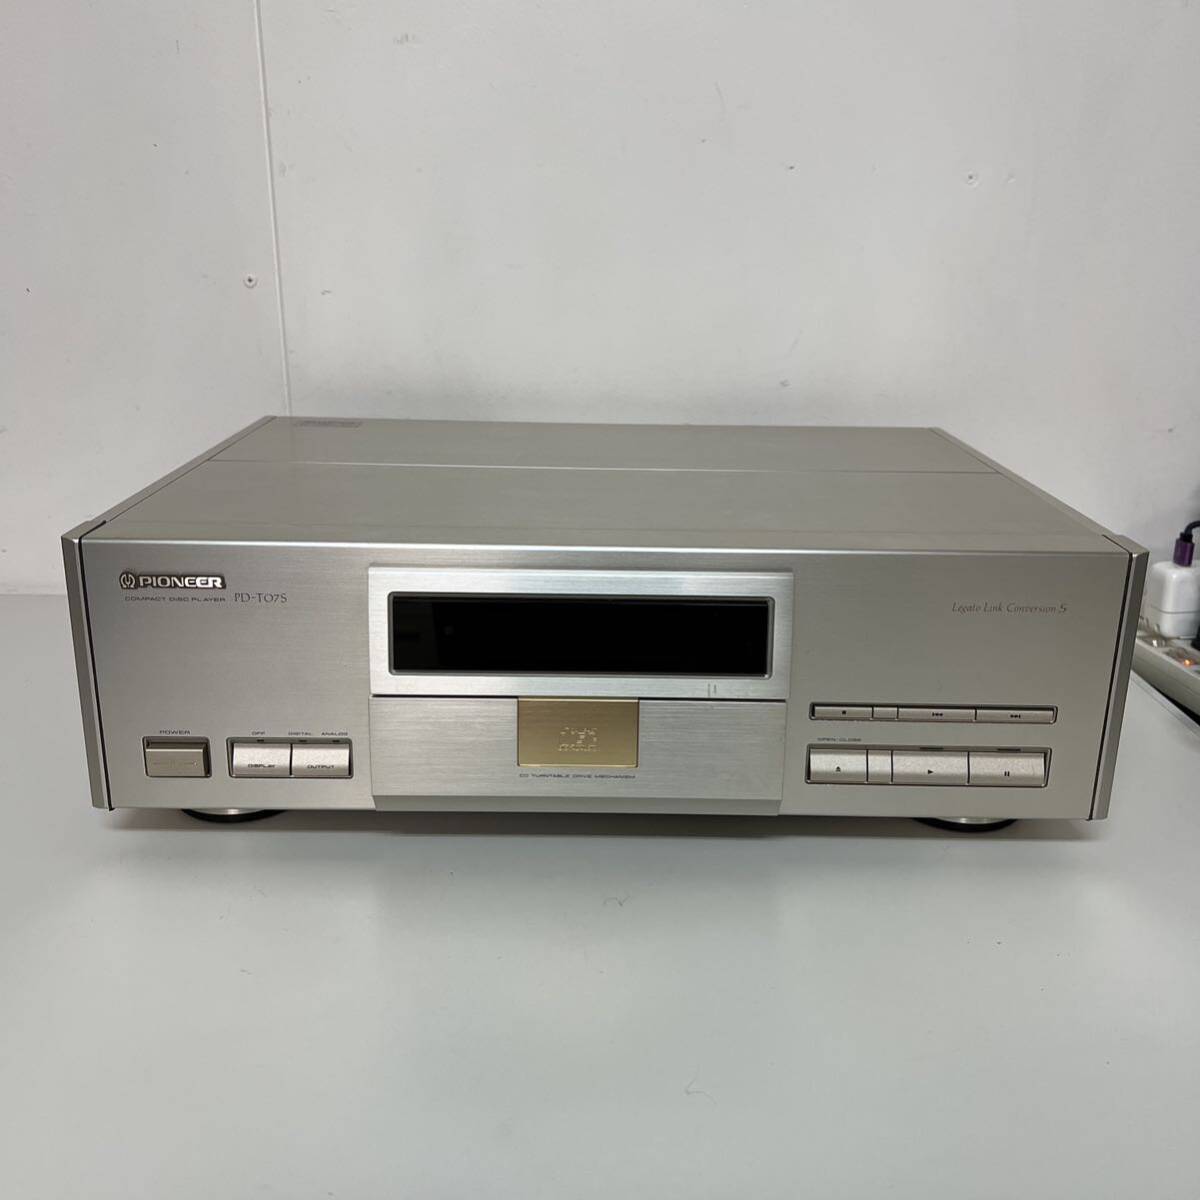 H444 Pioneer PD-T07S CD player sound equipment audio equipment Pioneer 